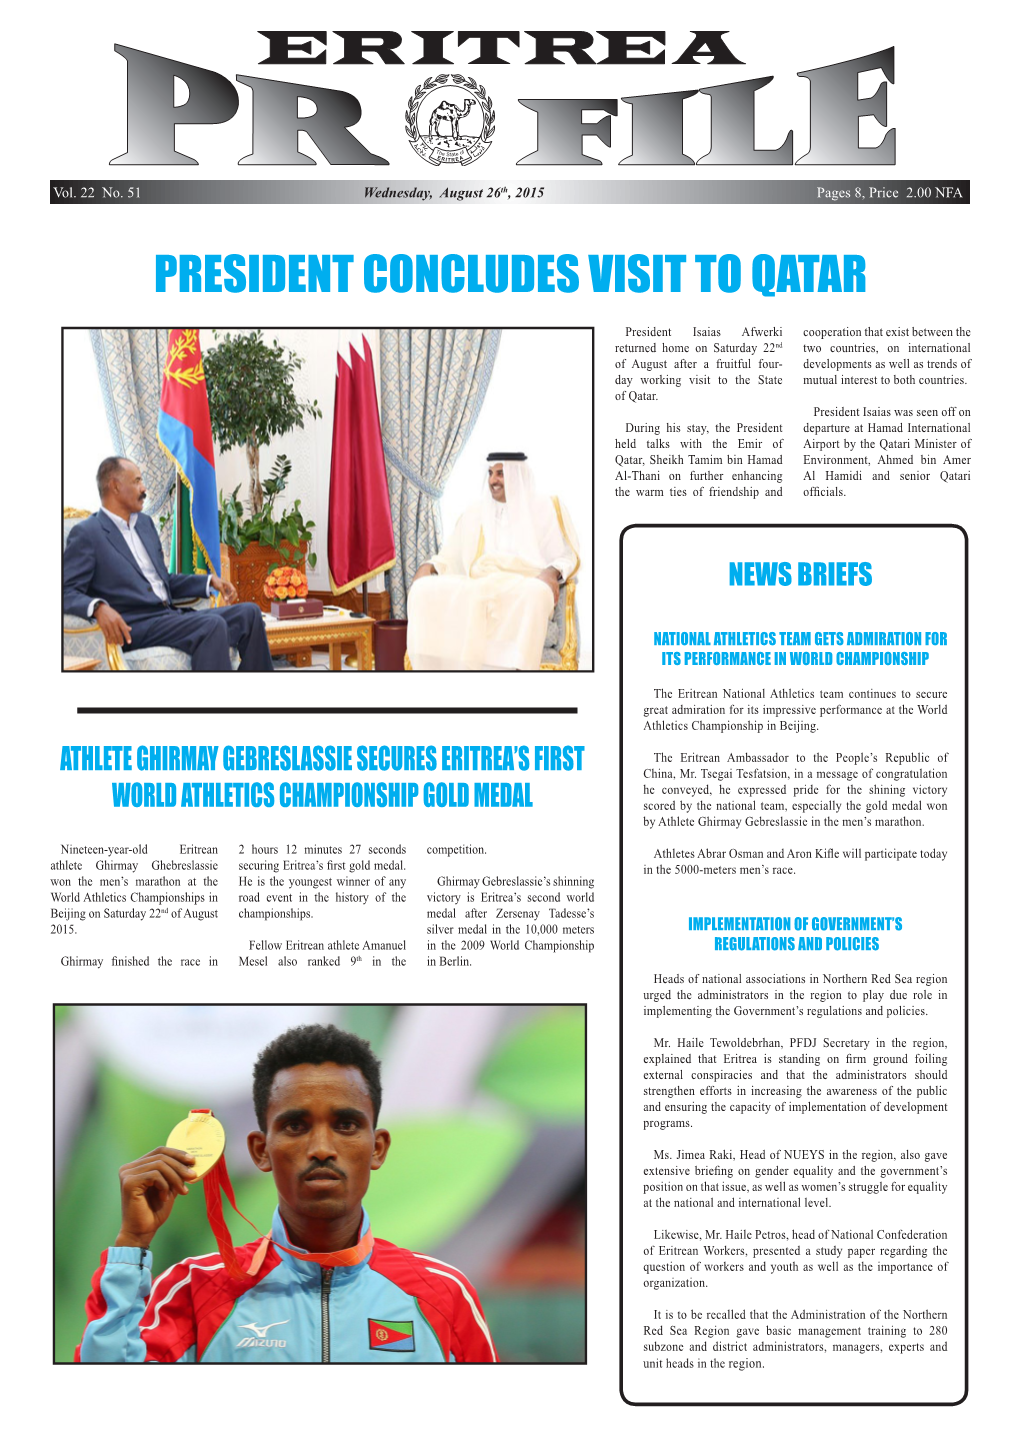 President Concludes Visit to Qatar